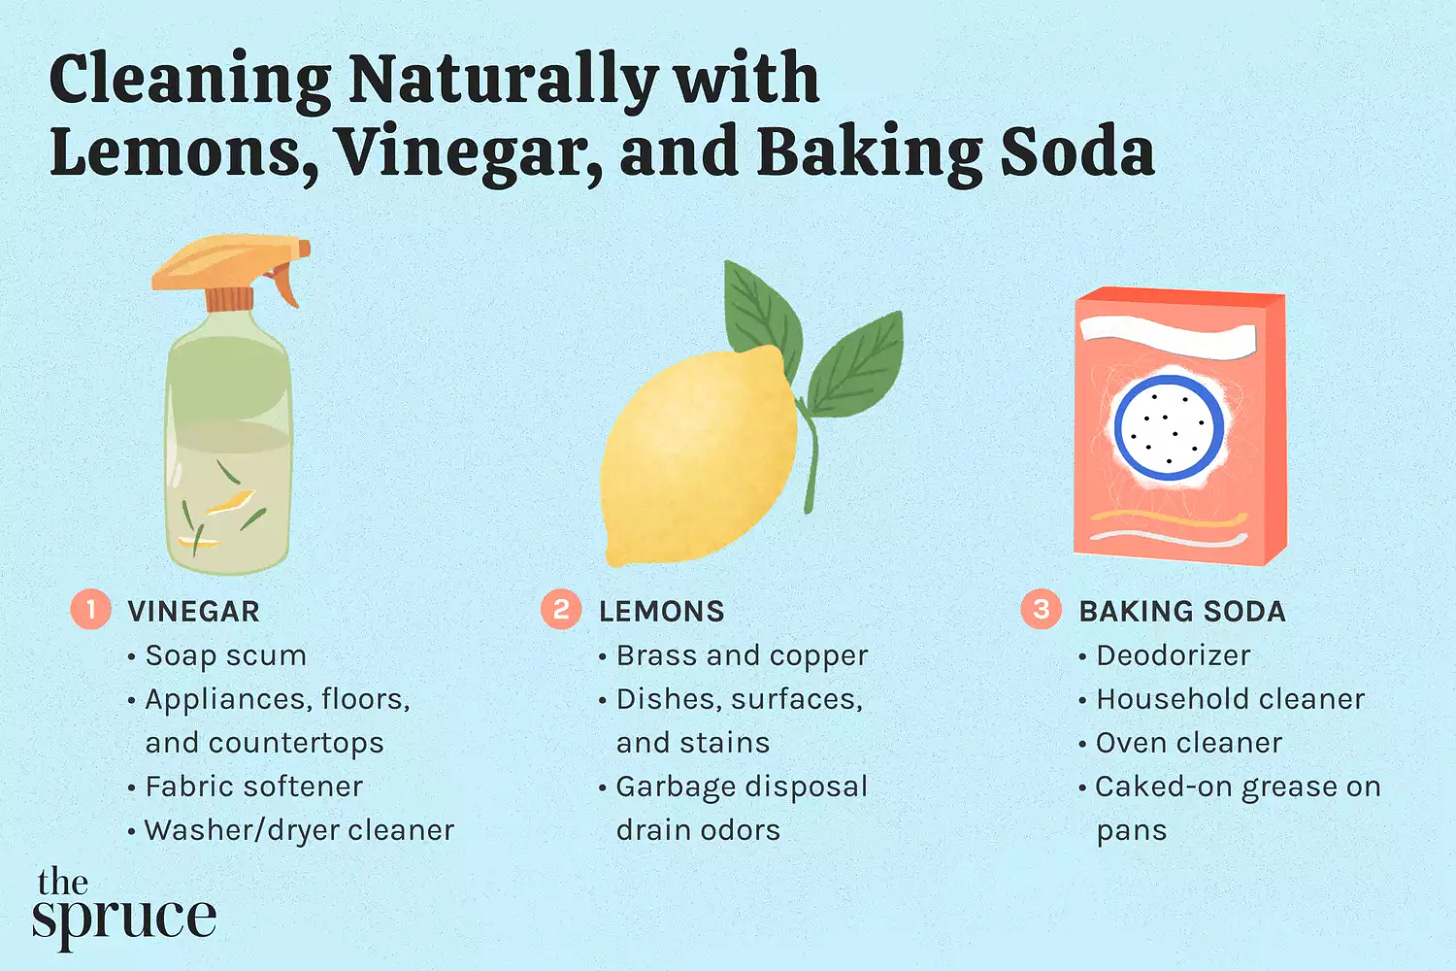 Cleaning Naturally with Lemons, Vinegar, and Baking Soda